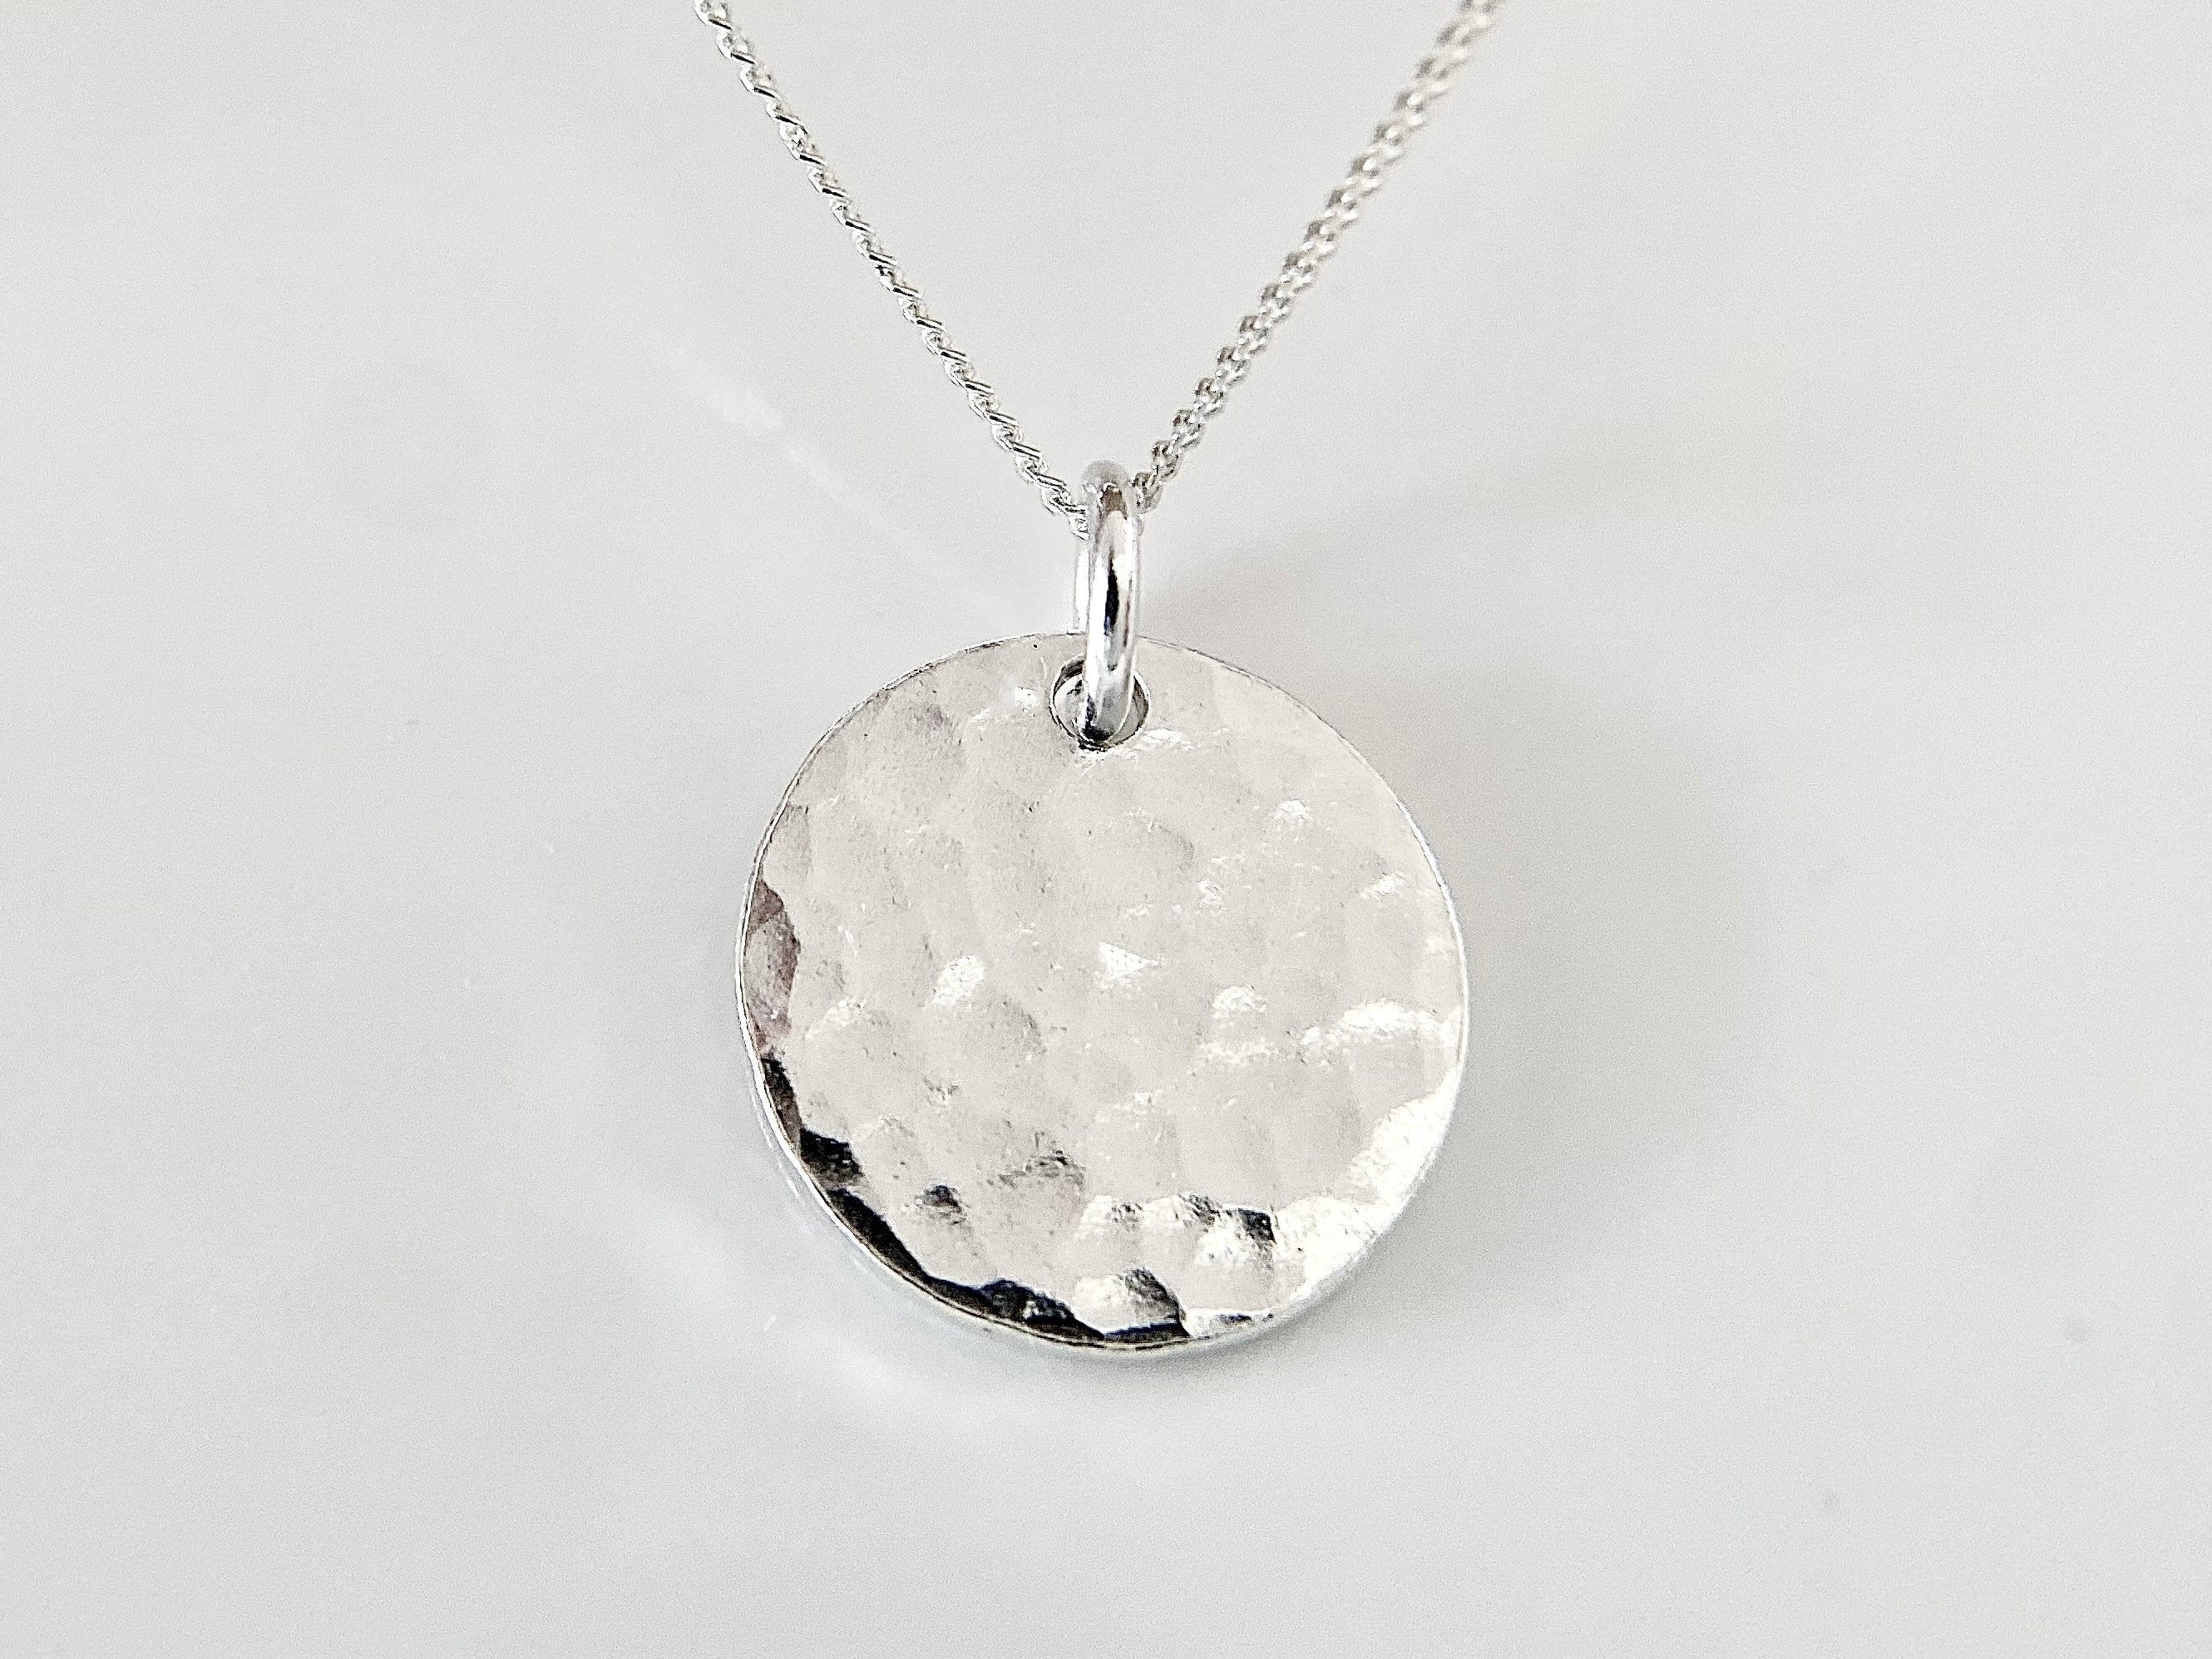 Personalised Sterling Silver Polished Disc Necklace